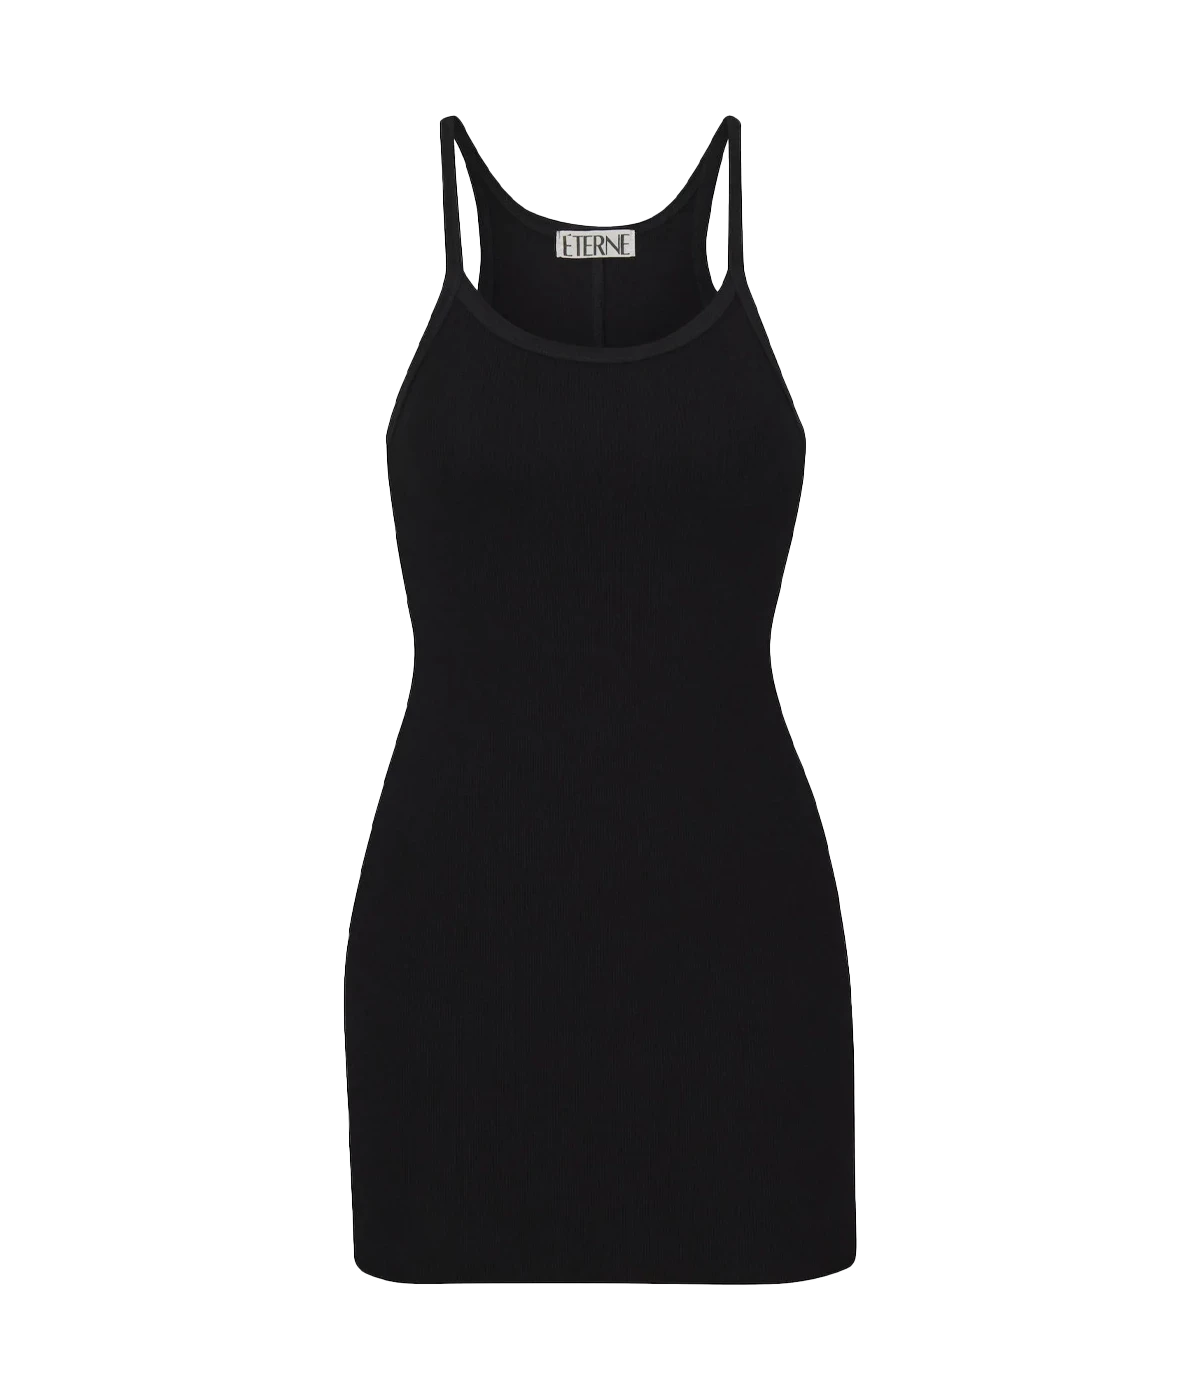 A Skims inspired figure hugging tank dress, made from cotton and modal blend, high neckline, lightweight, summer essential, summer coverup, made in USA, bra friendly, throw on and go. 